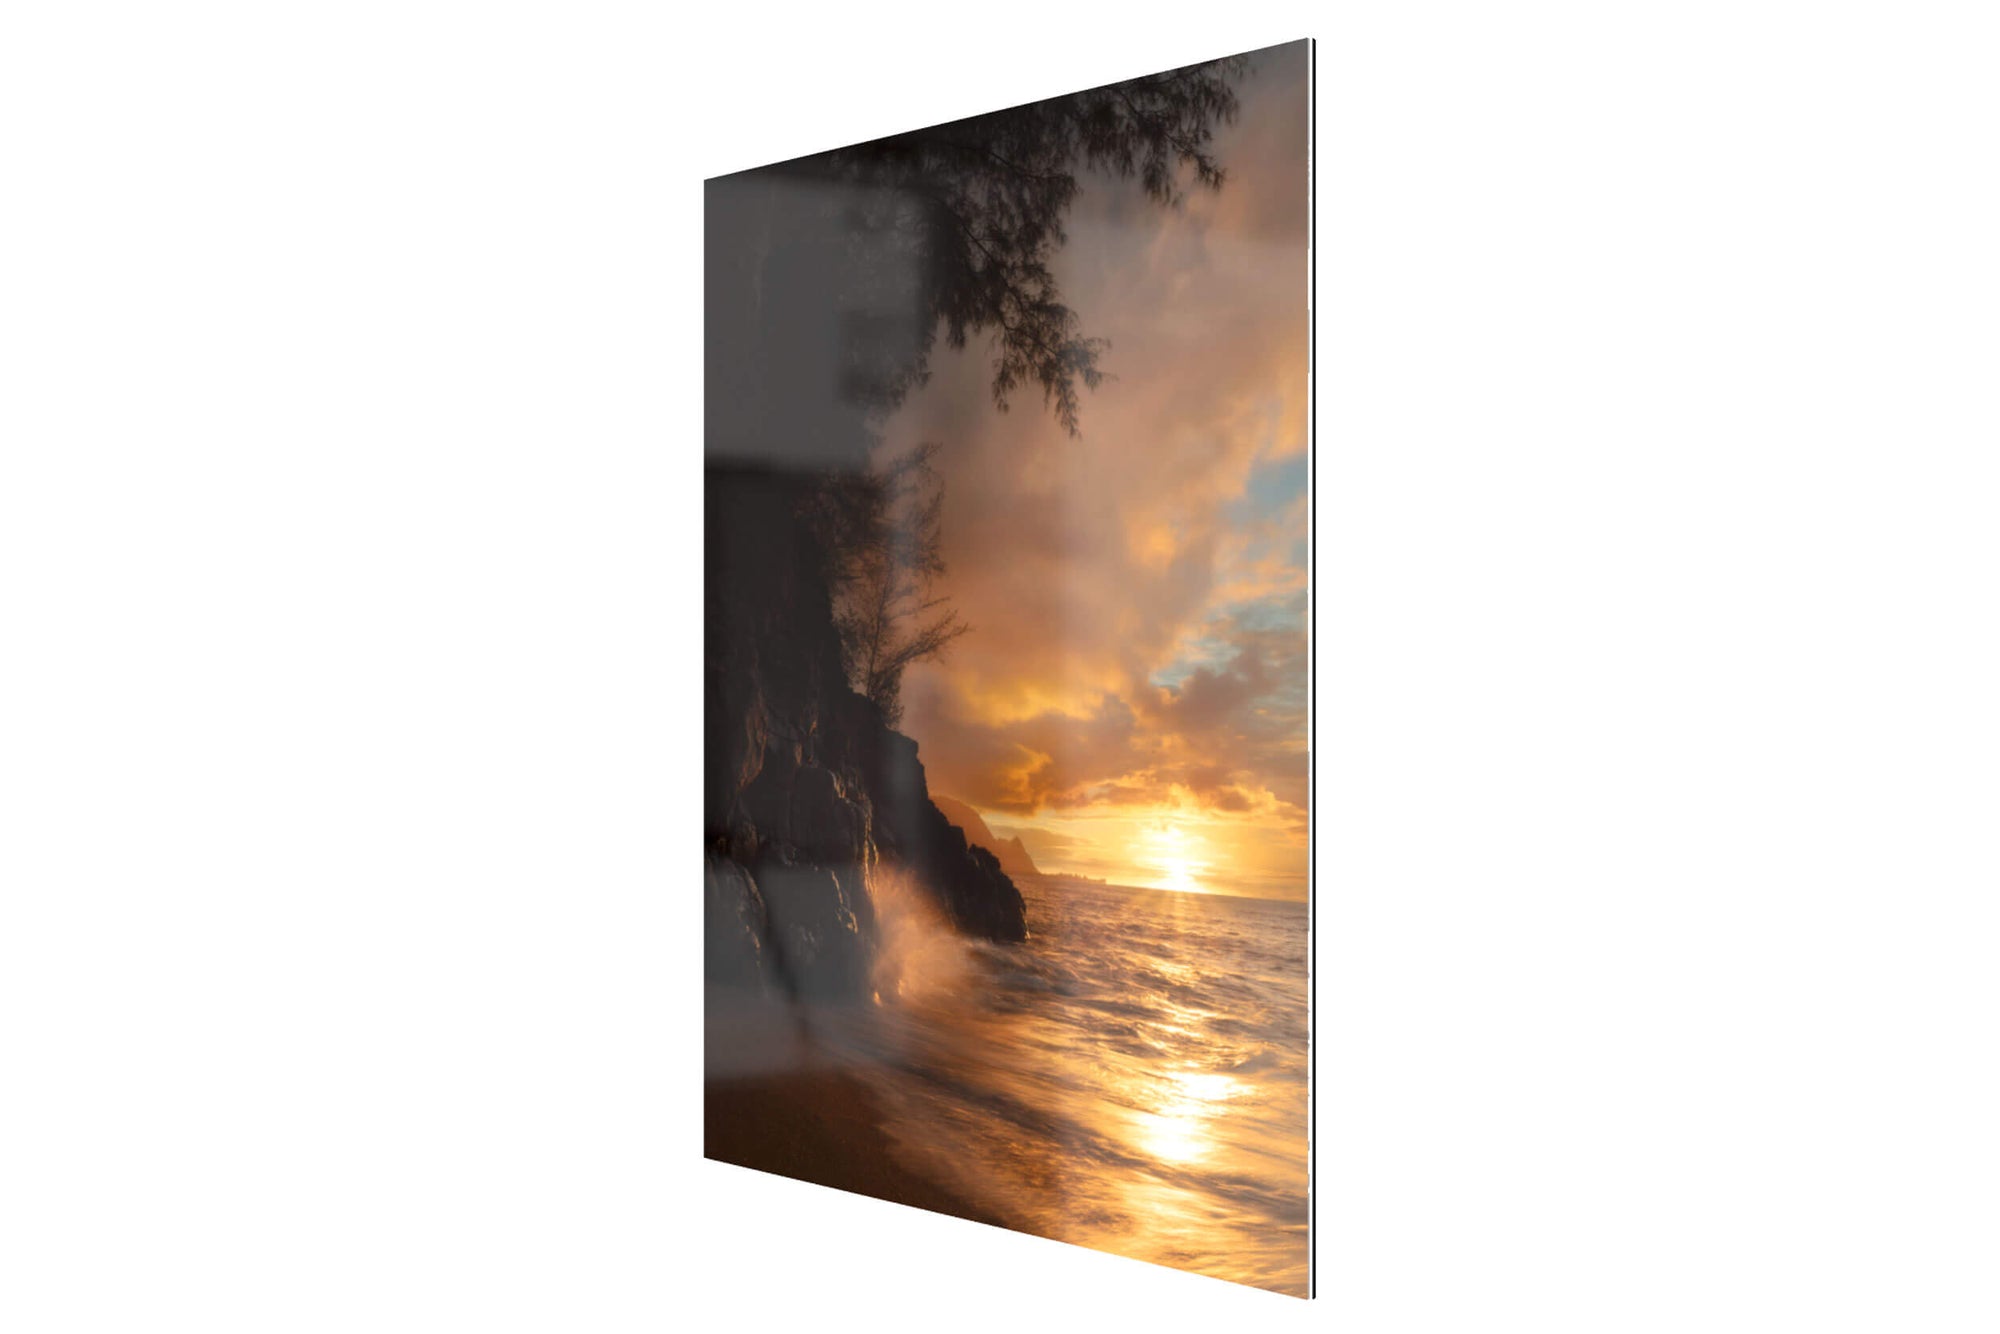 This piece of TruLife acrylic Kauai art shows a sunset picture from Hideaway Beach.